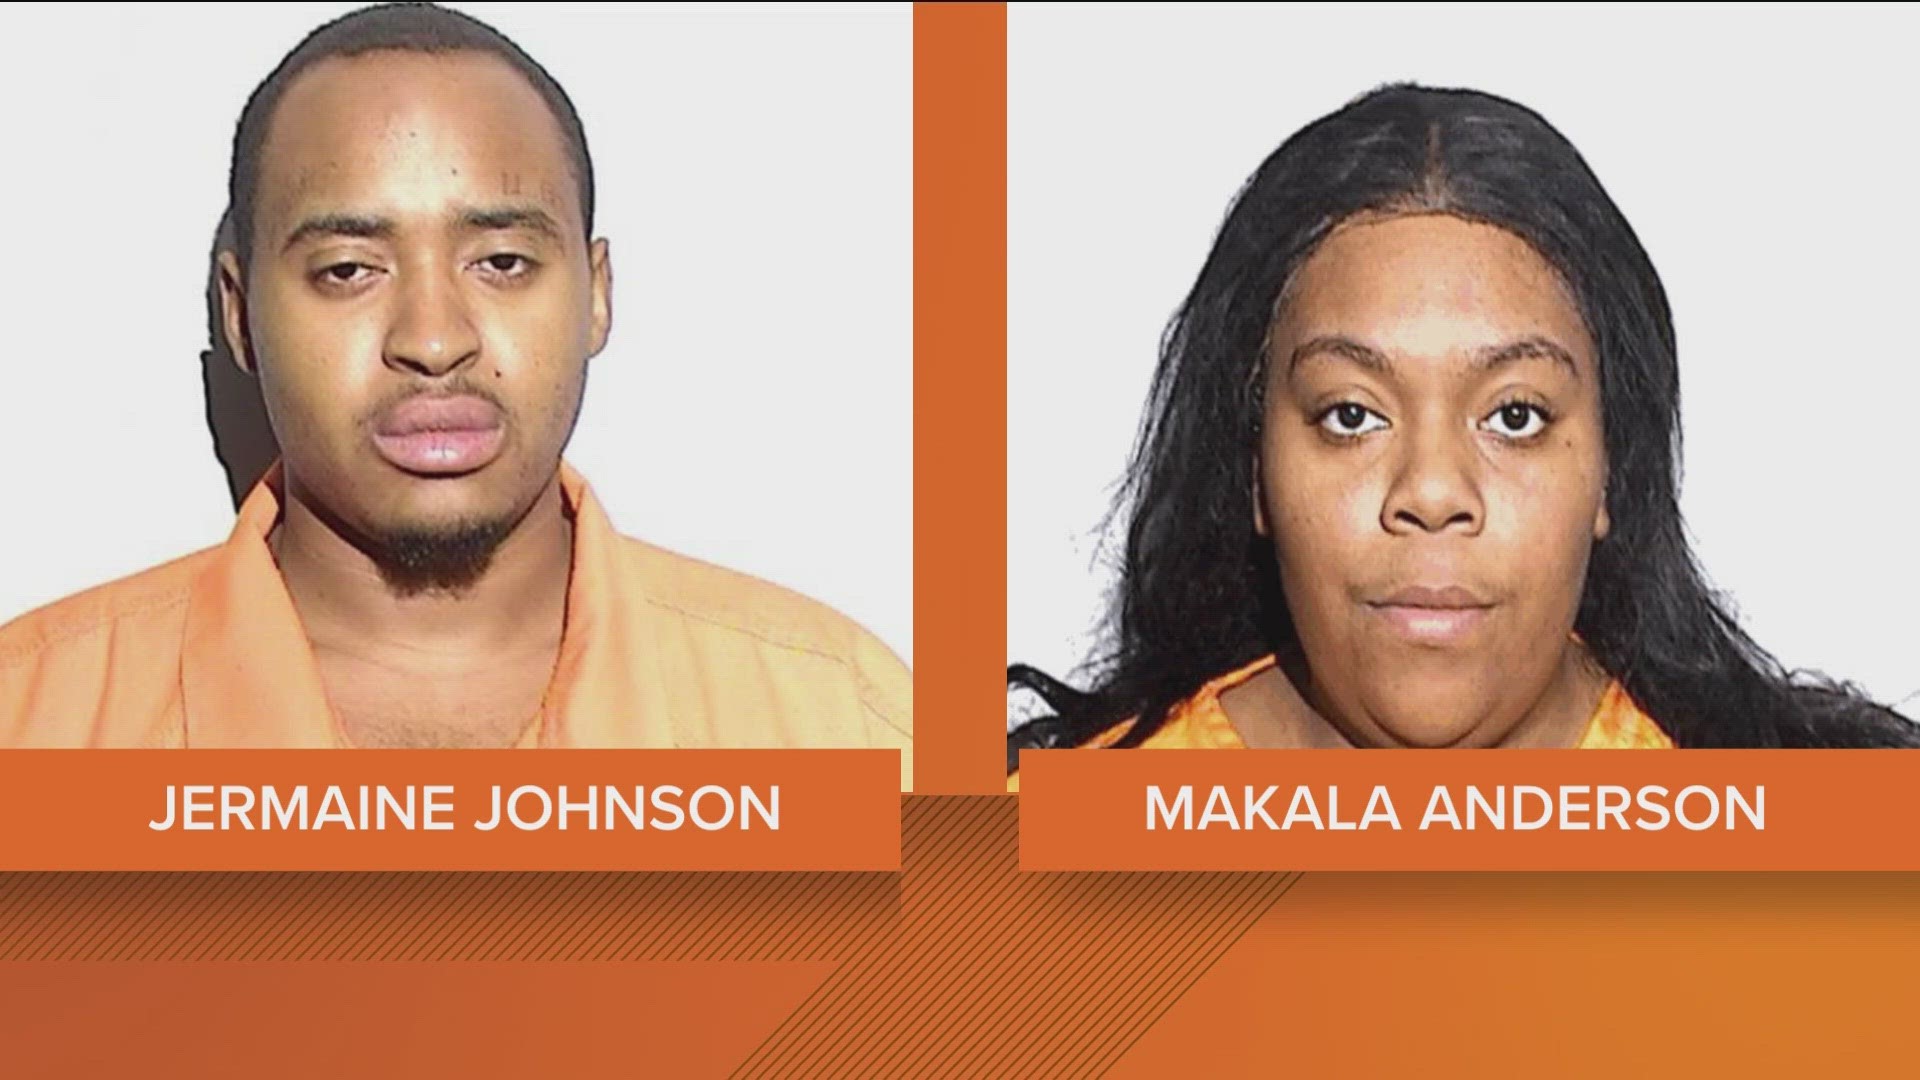 Both Makala Anderson and Jermaine Johnson are facing charges of premeditated aggravated murder in the death of Terrance Green, 14. Johnson is not yet in custody.